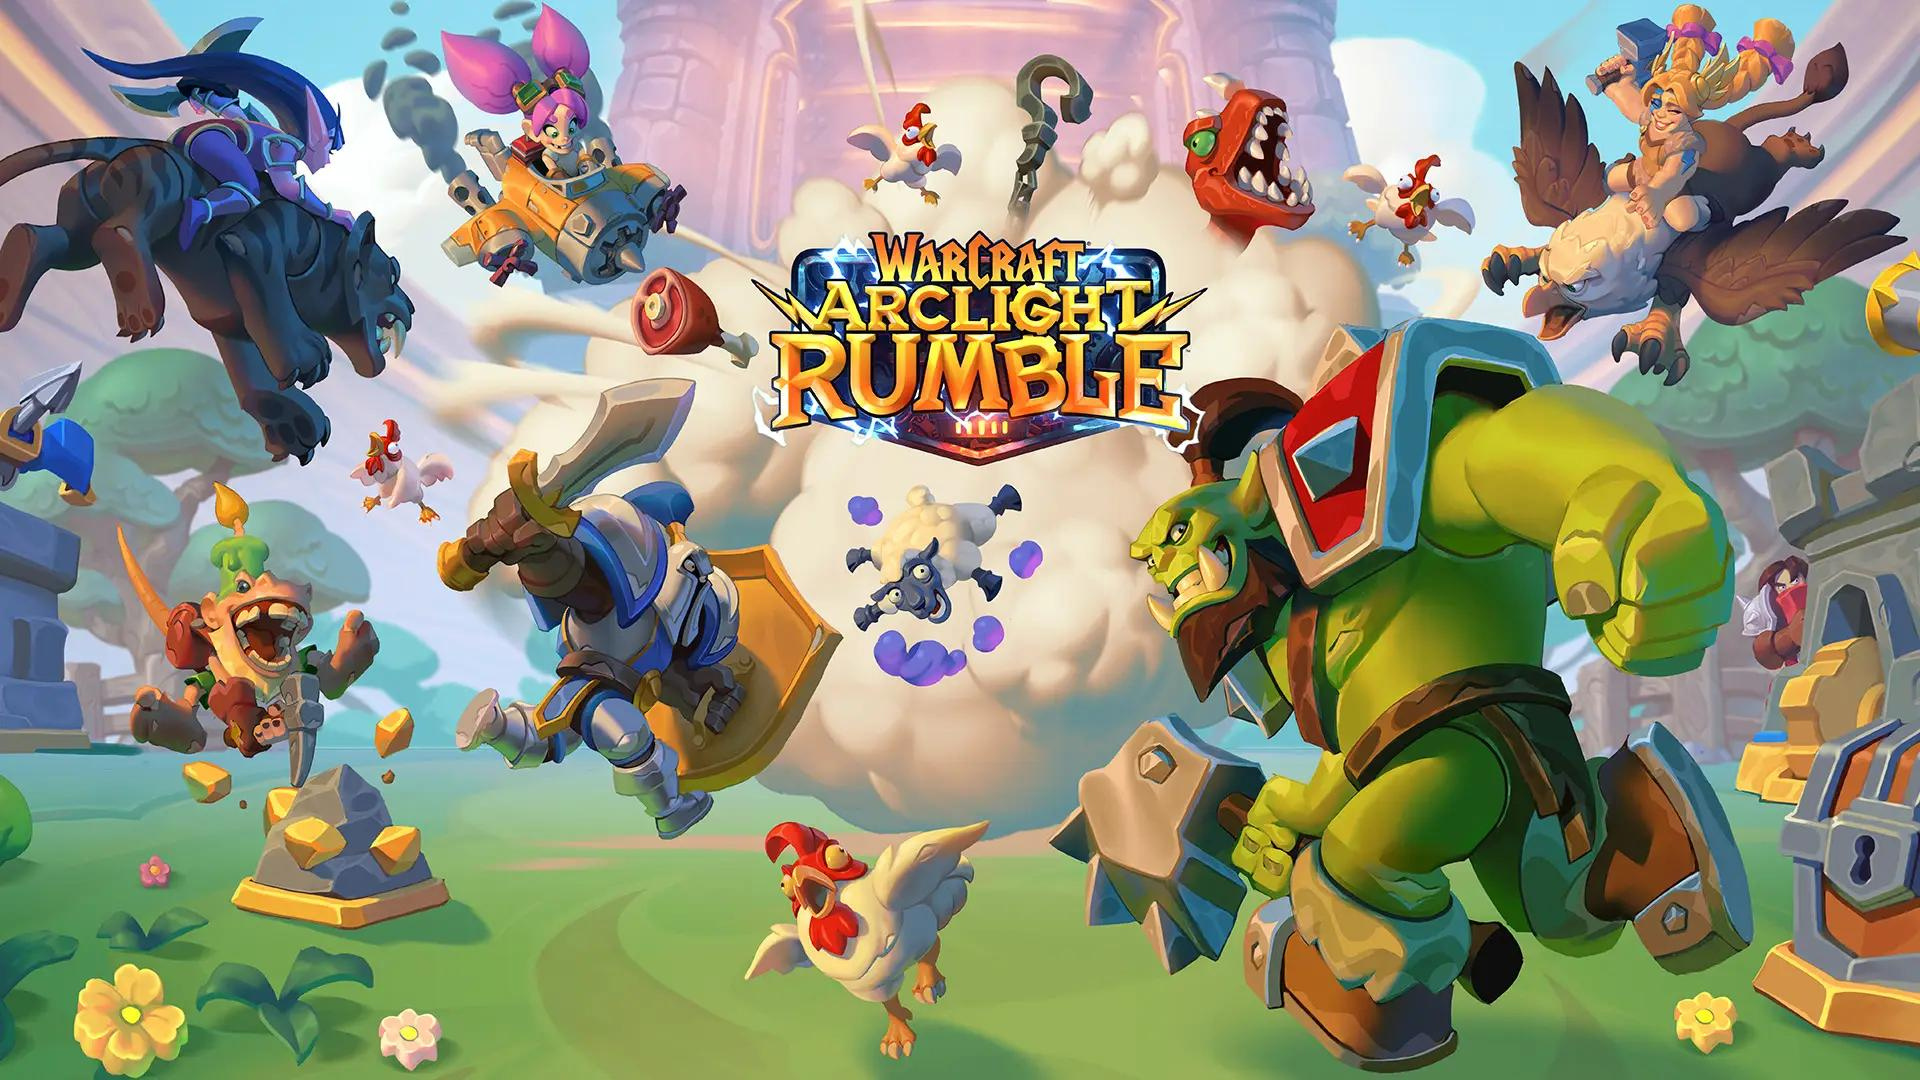 Warcraft Arclight Rumble, Mobile game, Coming soon, Blizzard unveils, 1920x1080 Full HD Desktop